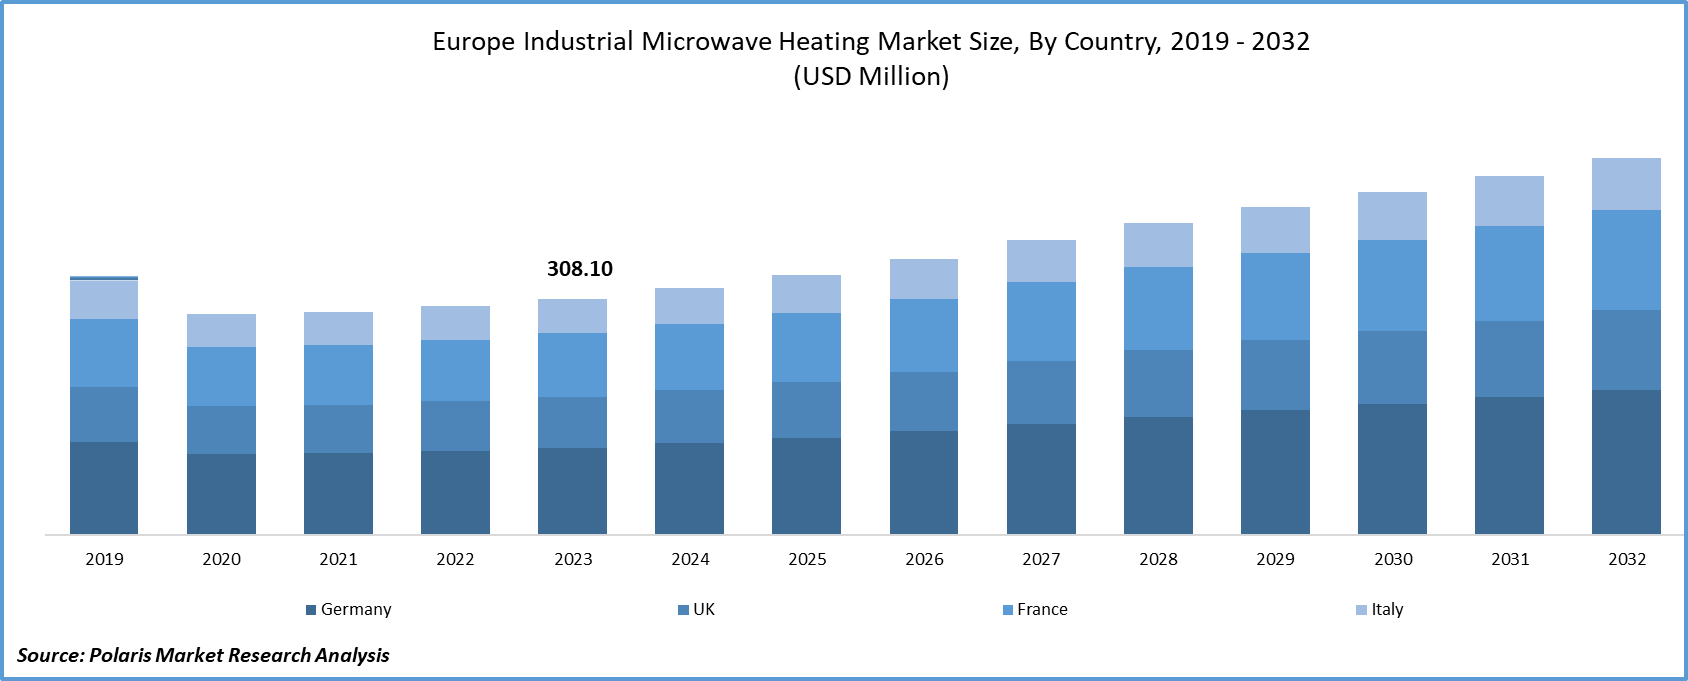 Europe Industrial Microwave Heating Market Size